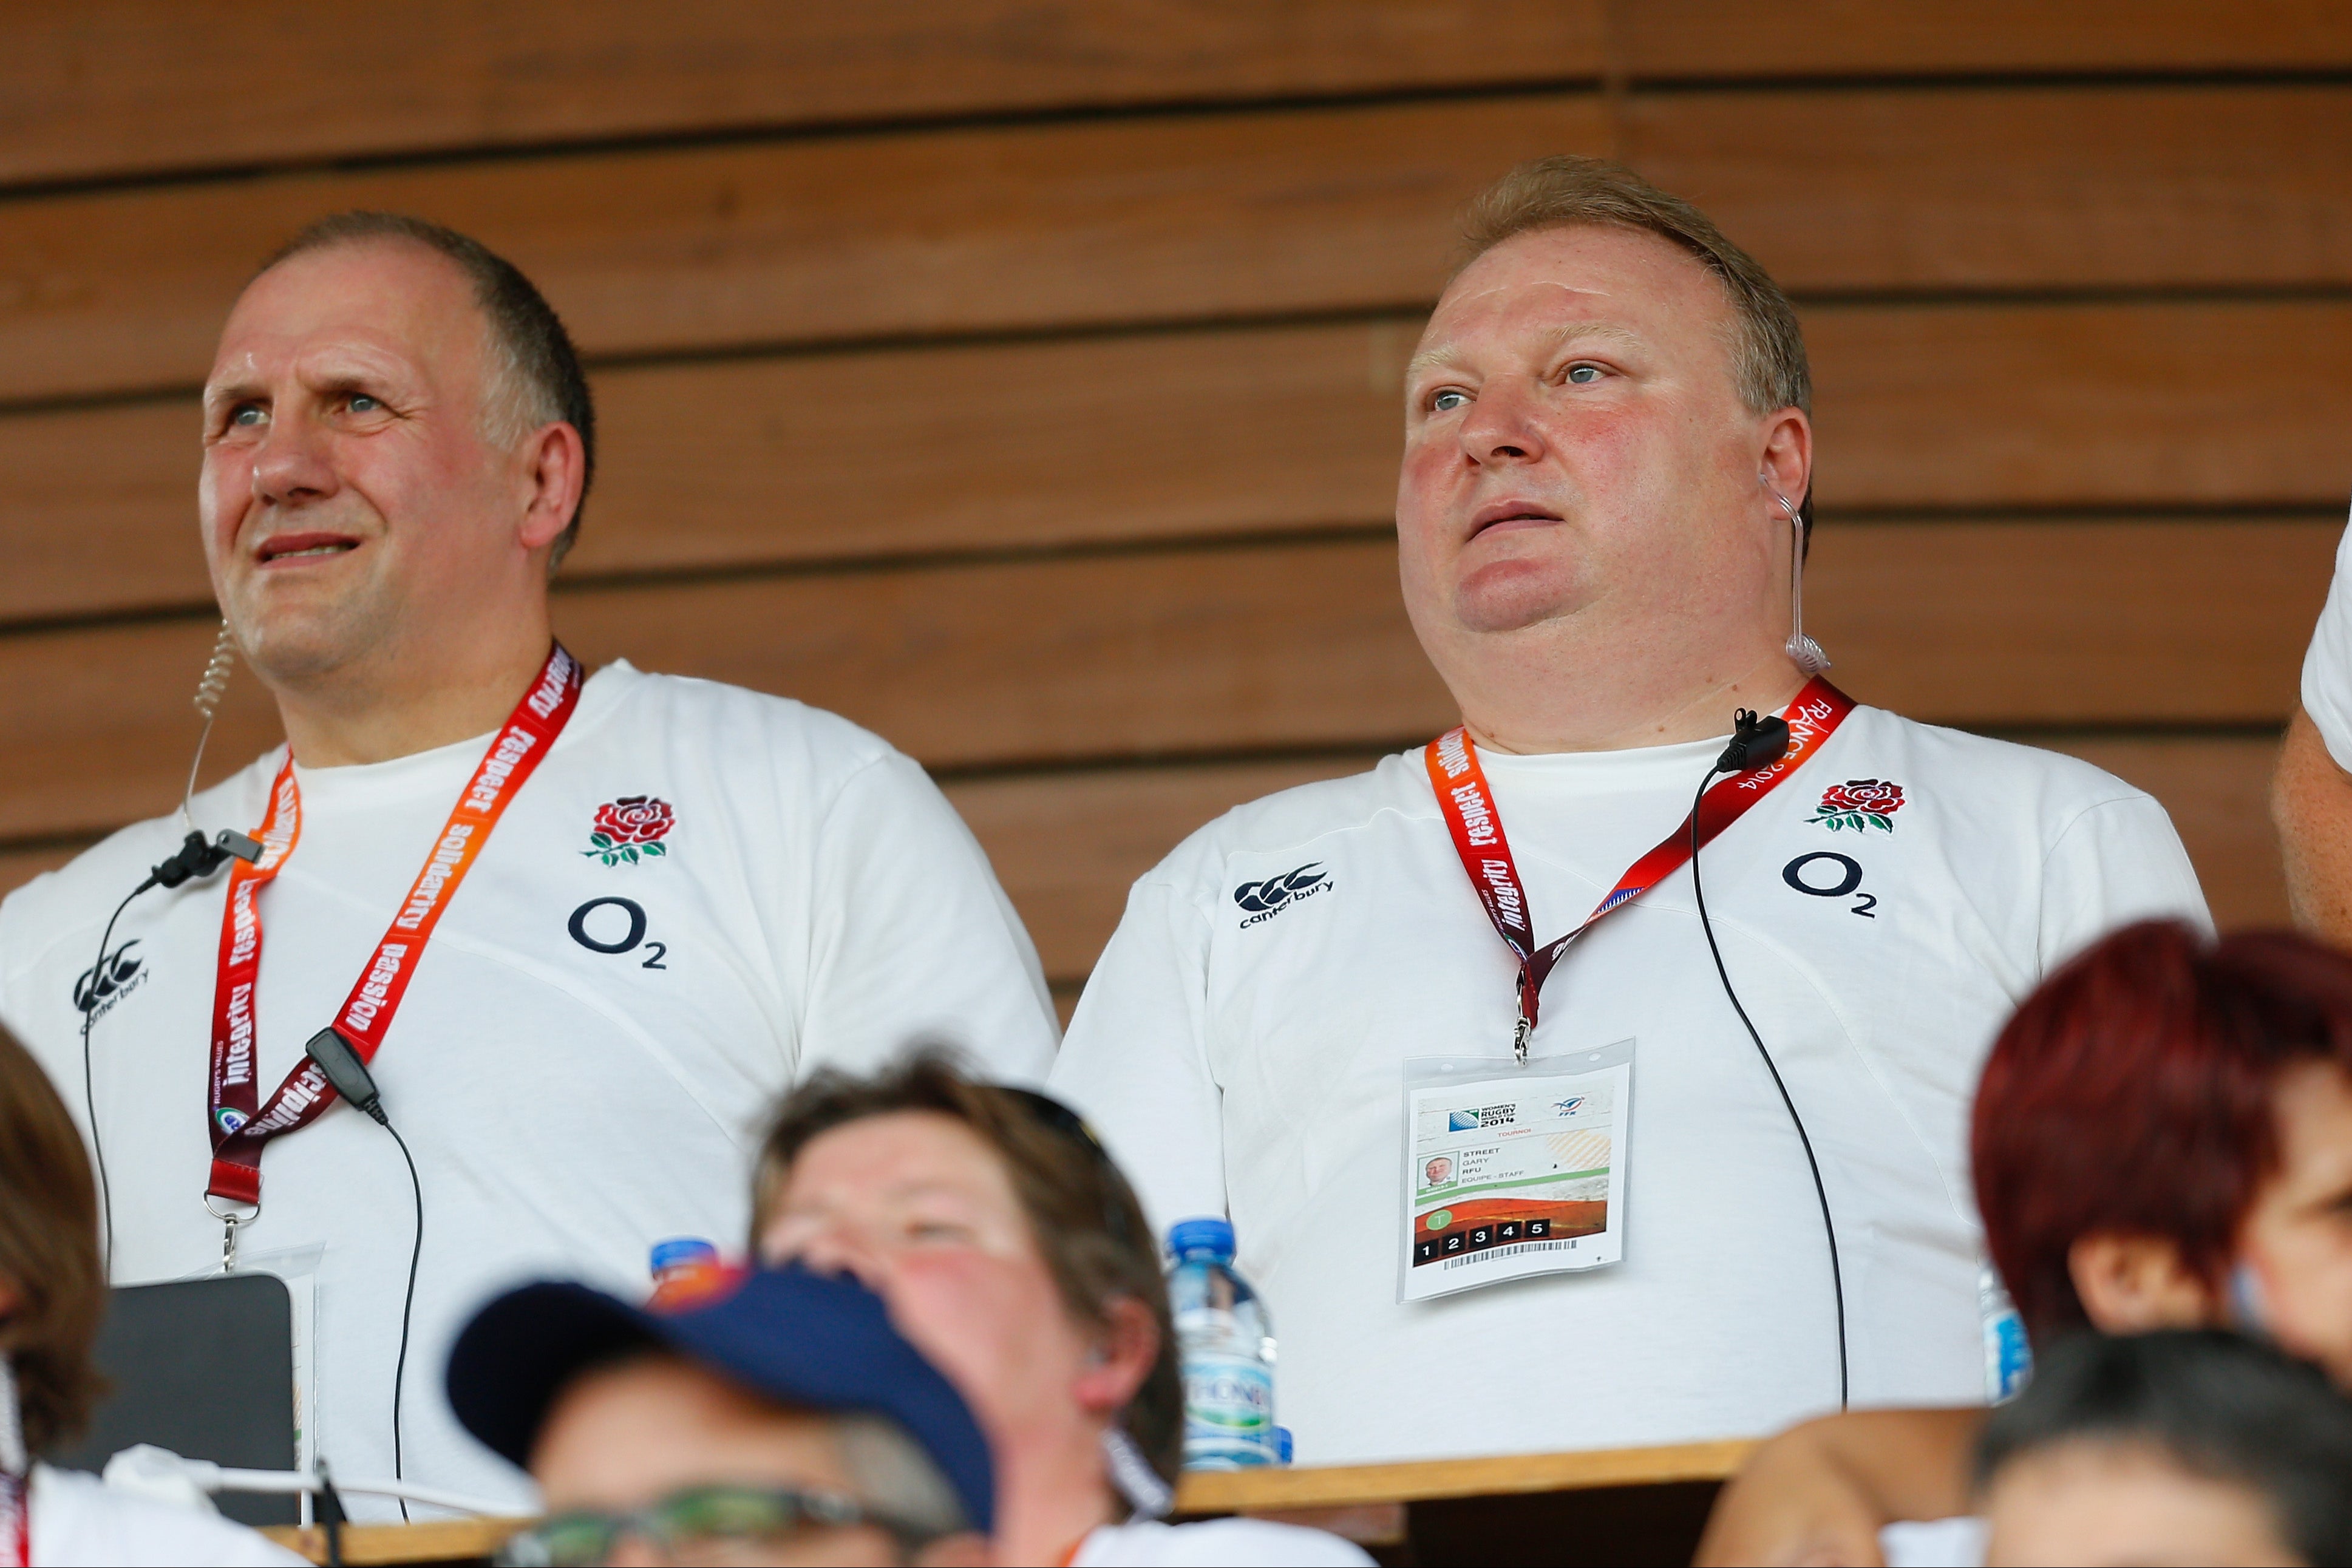 Gary Street (right) and Graham Smith departed the RFU in 2015